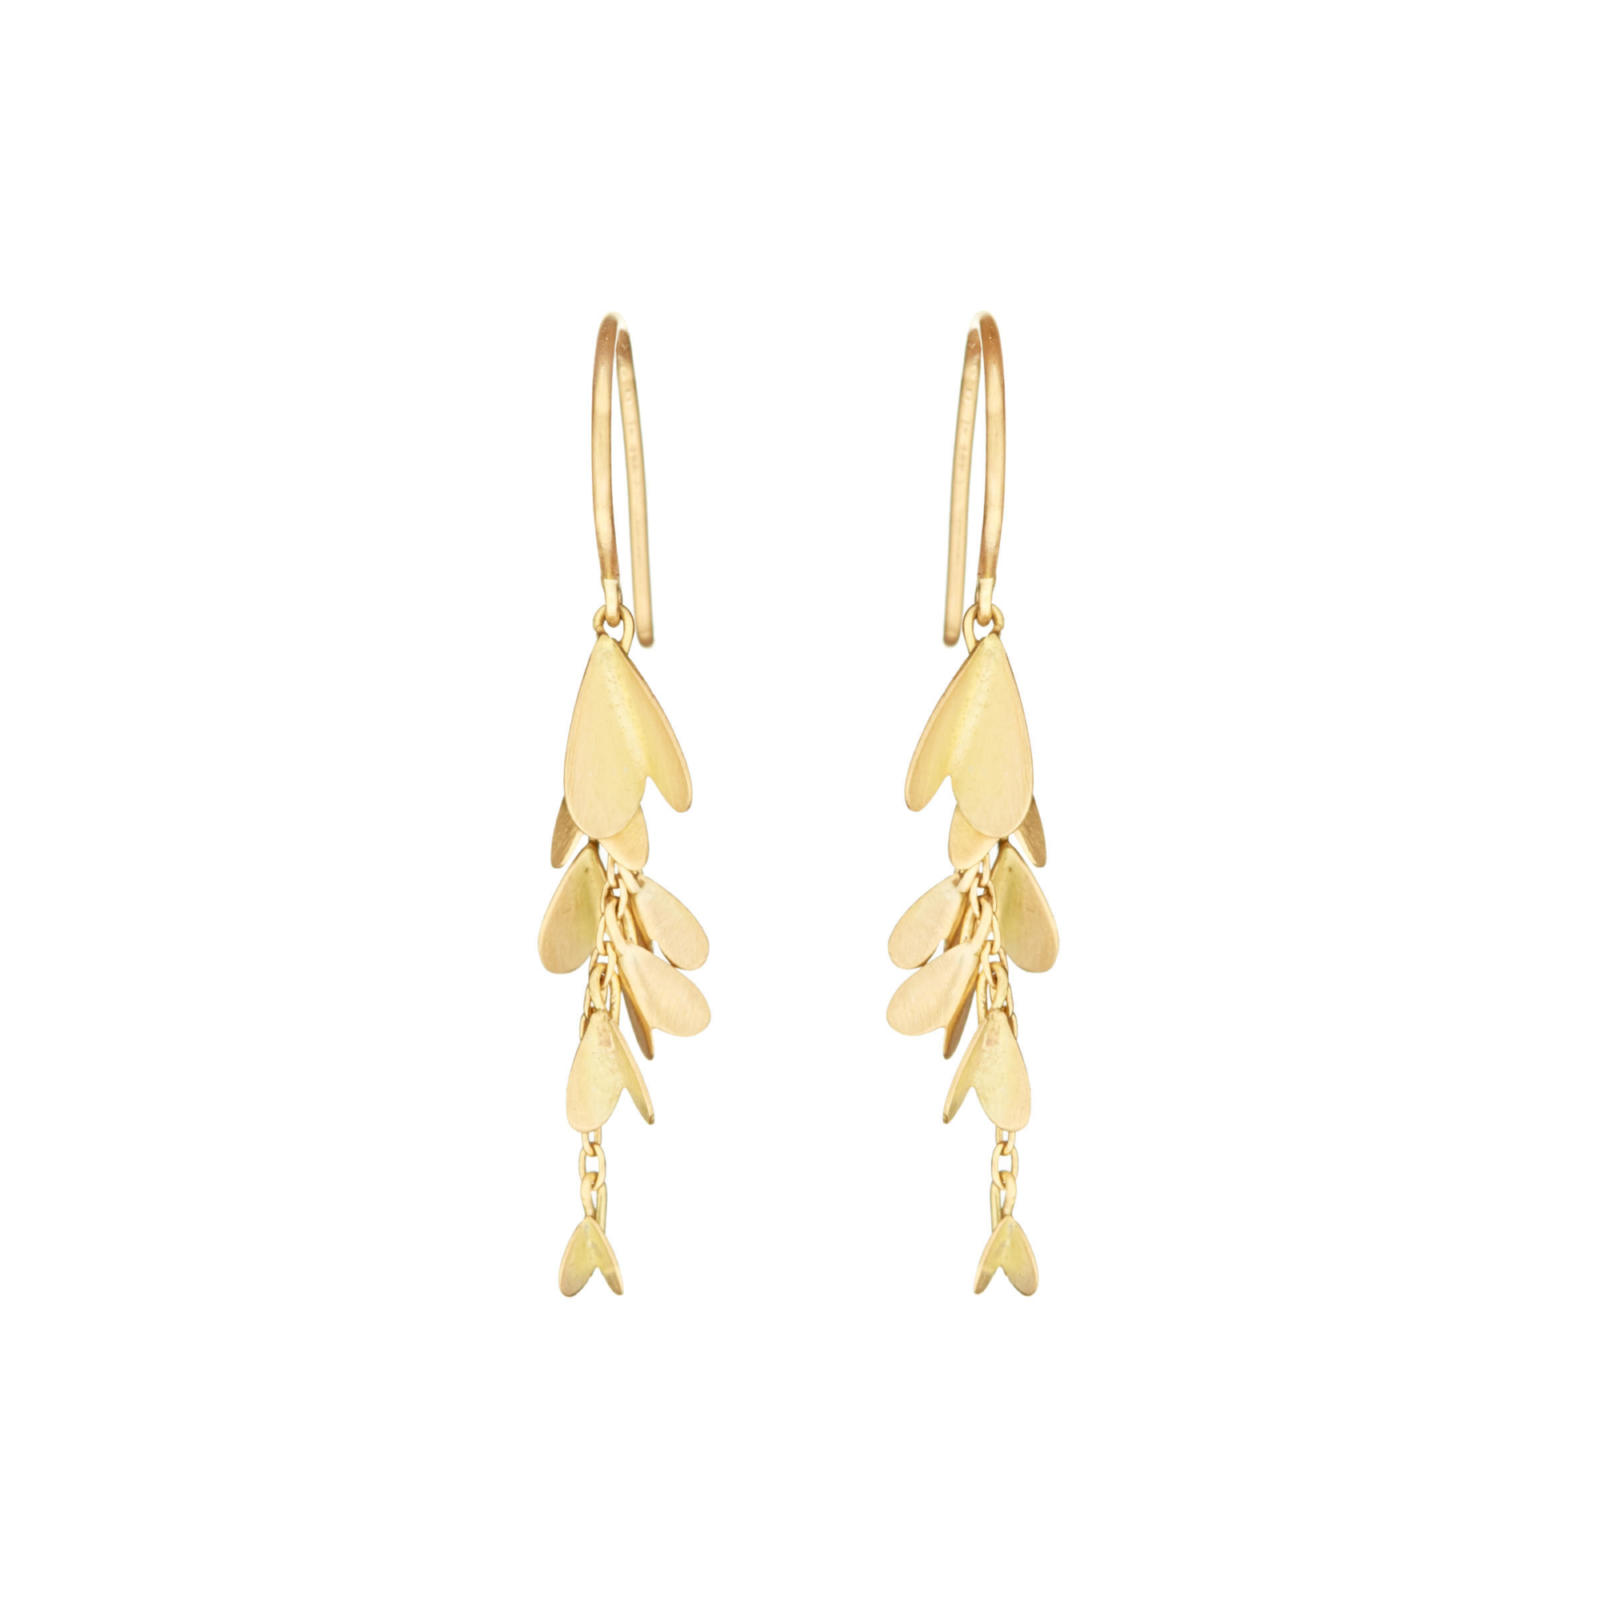 Sia Taylor ME7 Y Yellow Gold Earrings S